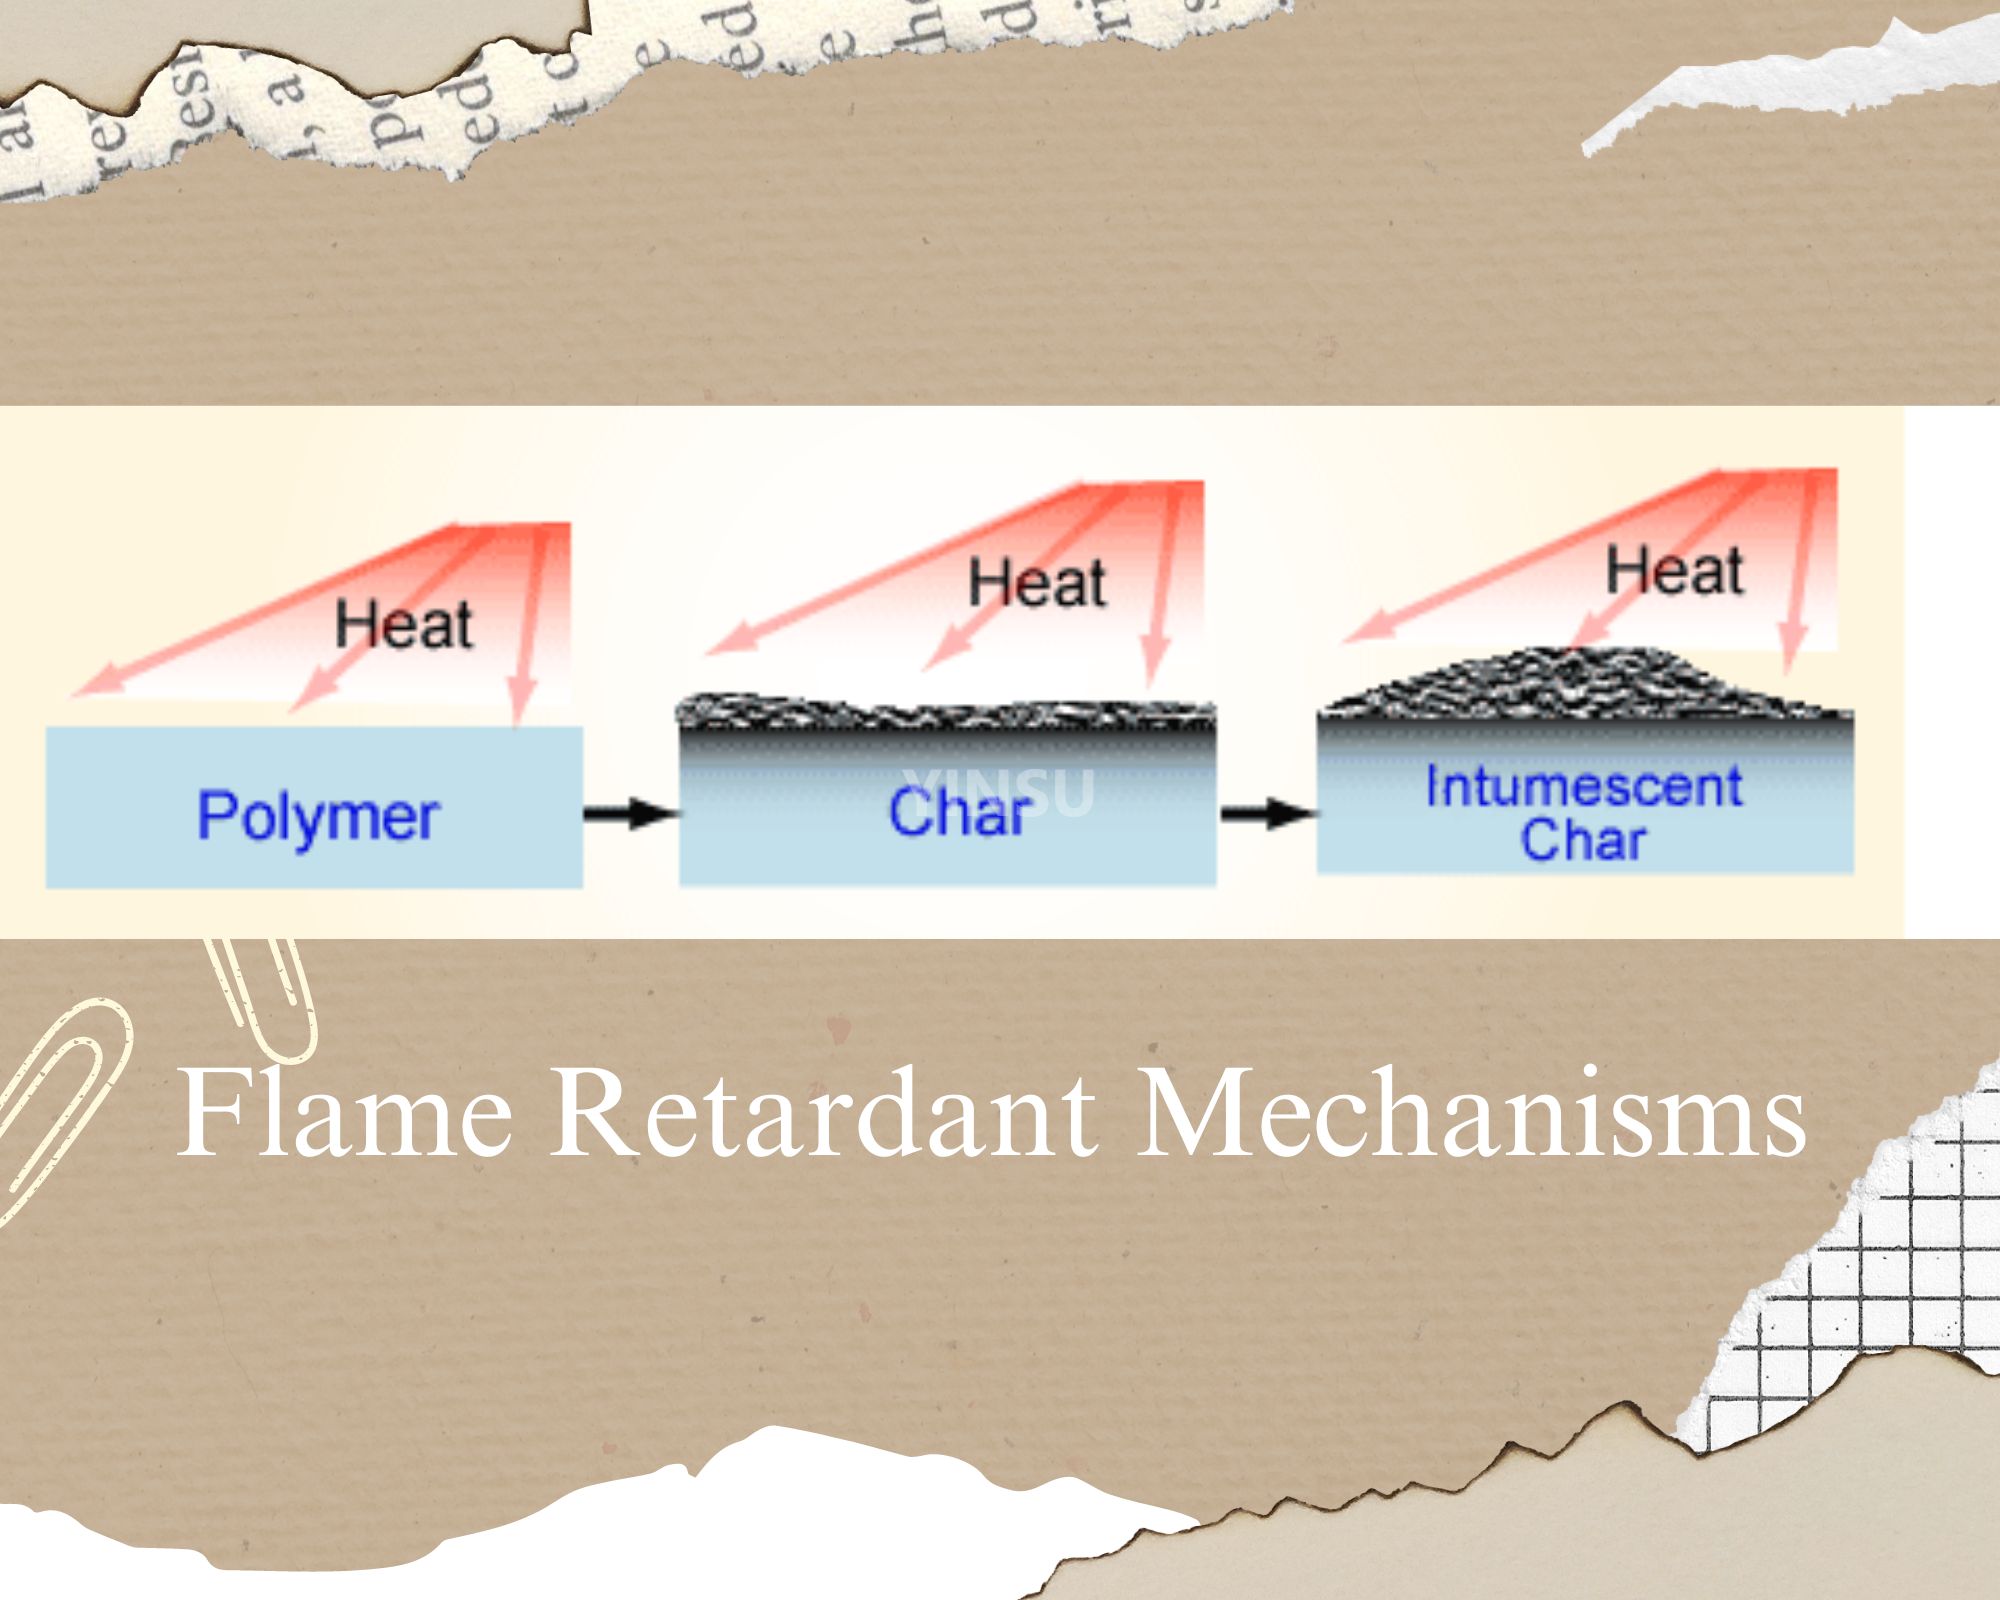 Classification of Flame Retardants and Analysis of Their Role Mechanisms